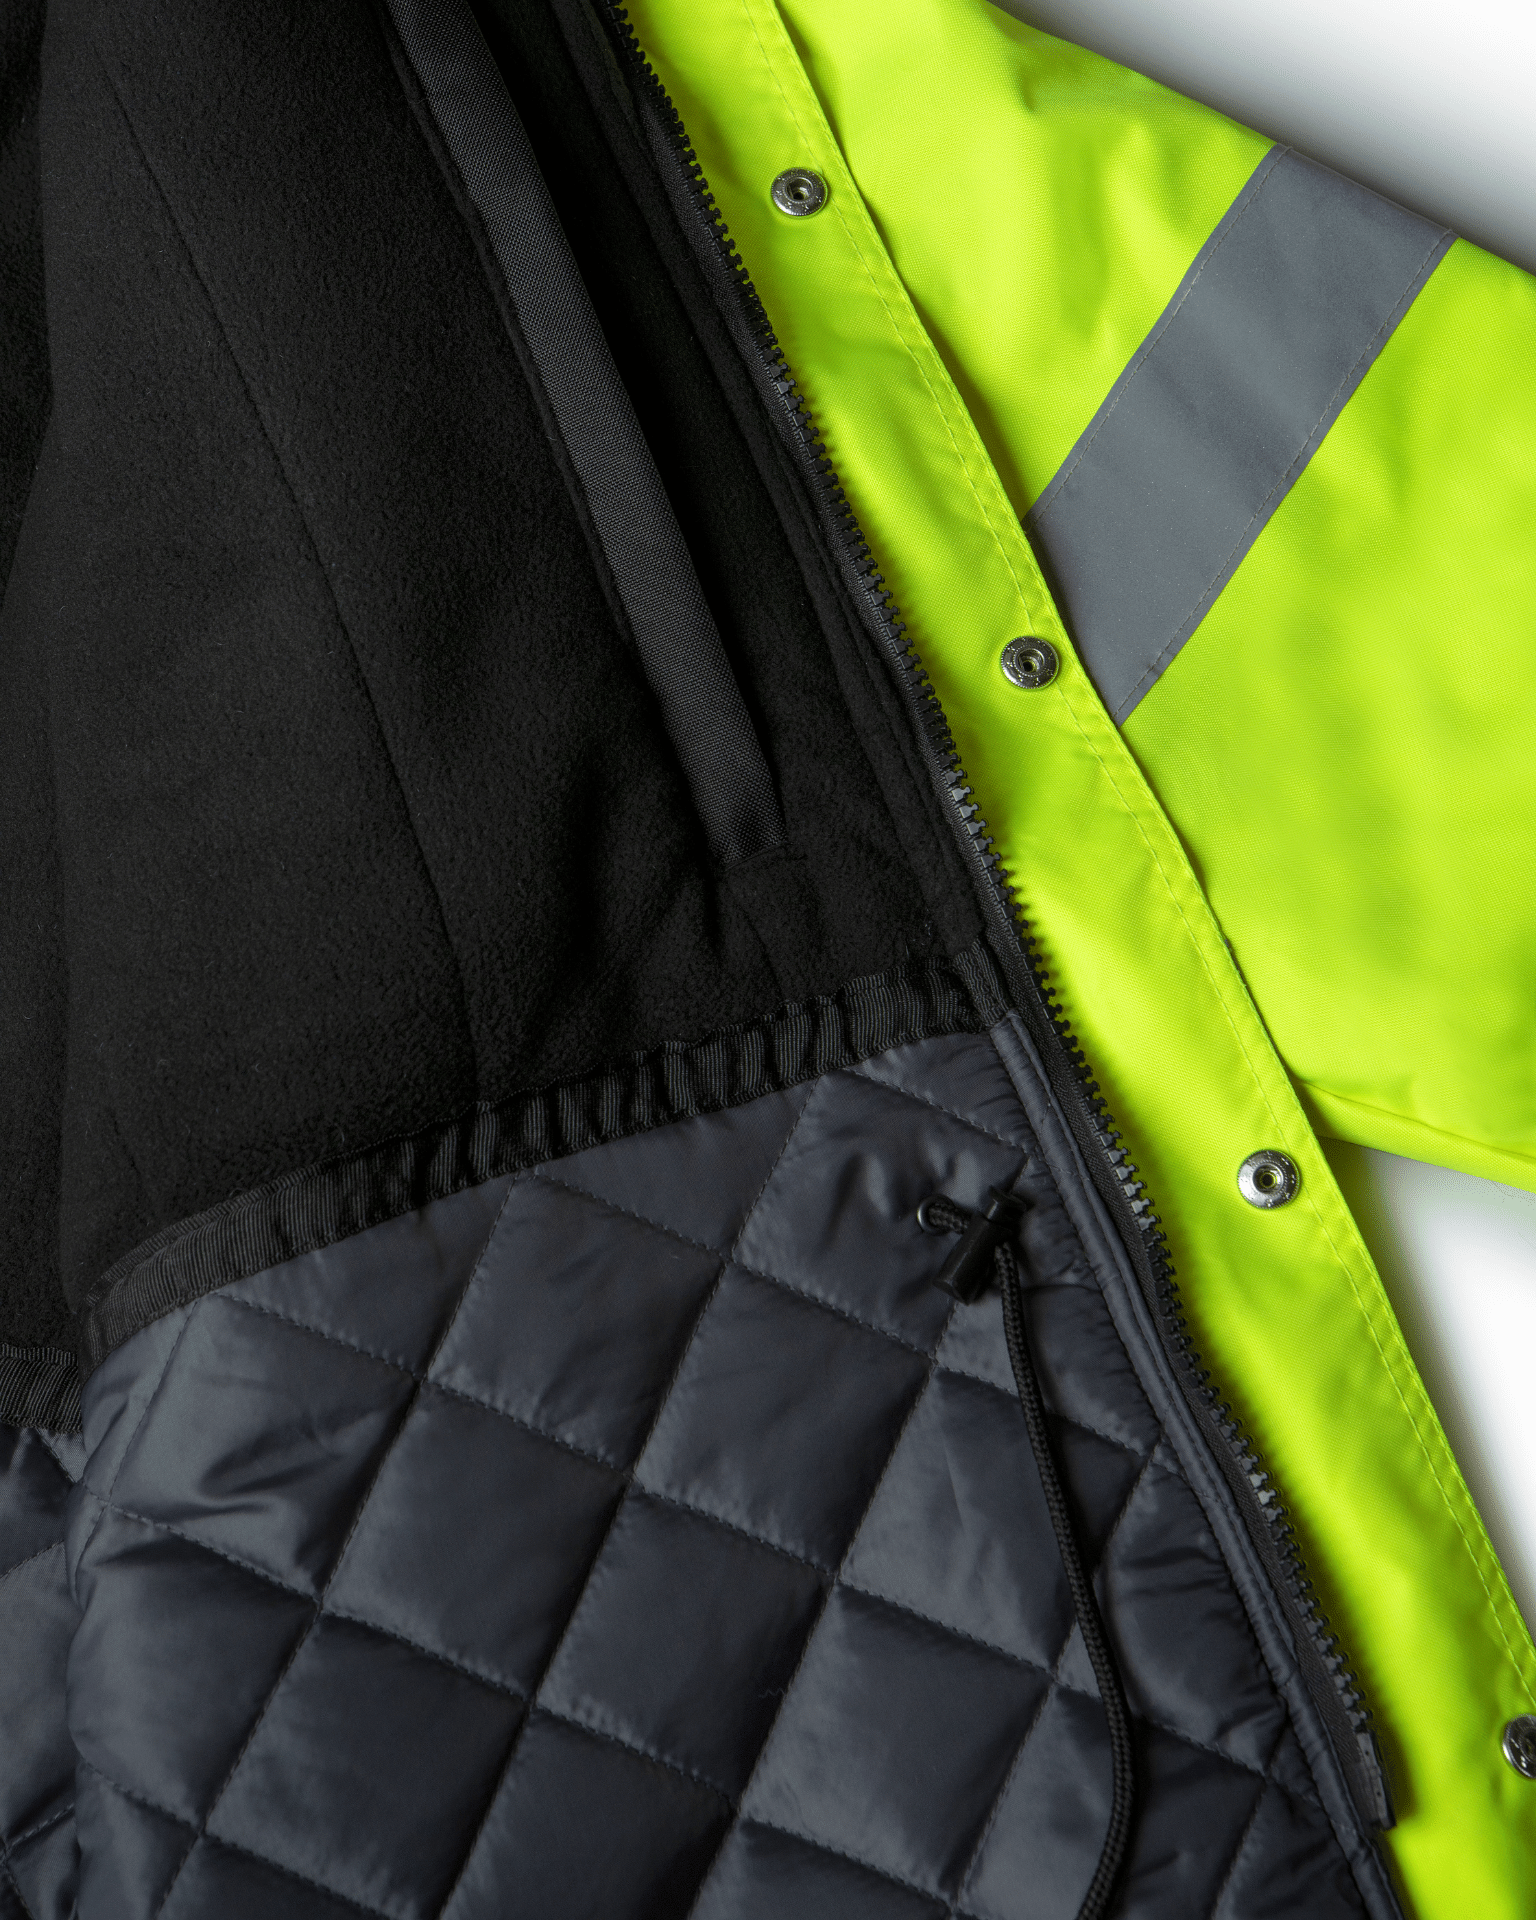 ANSI Class 3 High Visibility Contractor Jacket for men by Utility Pro